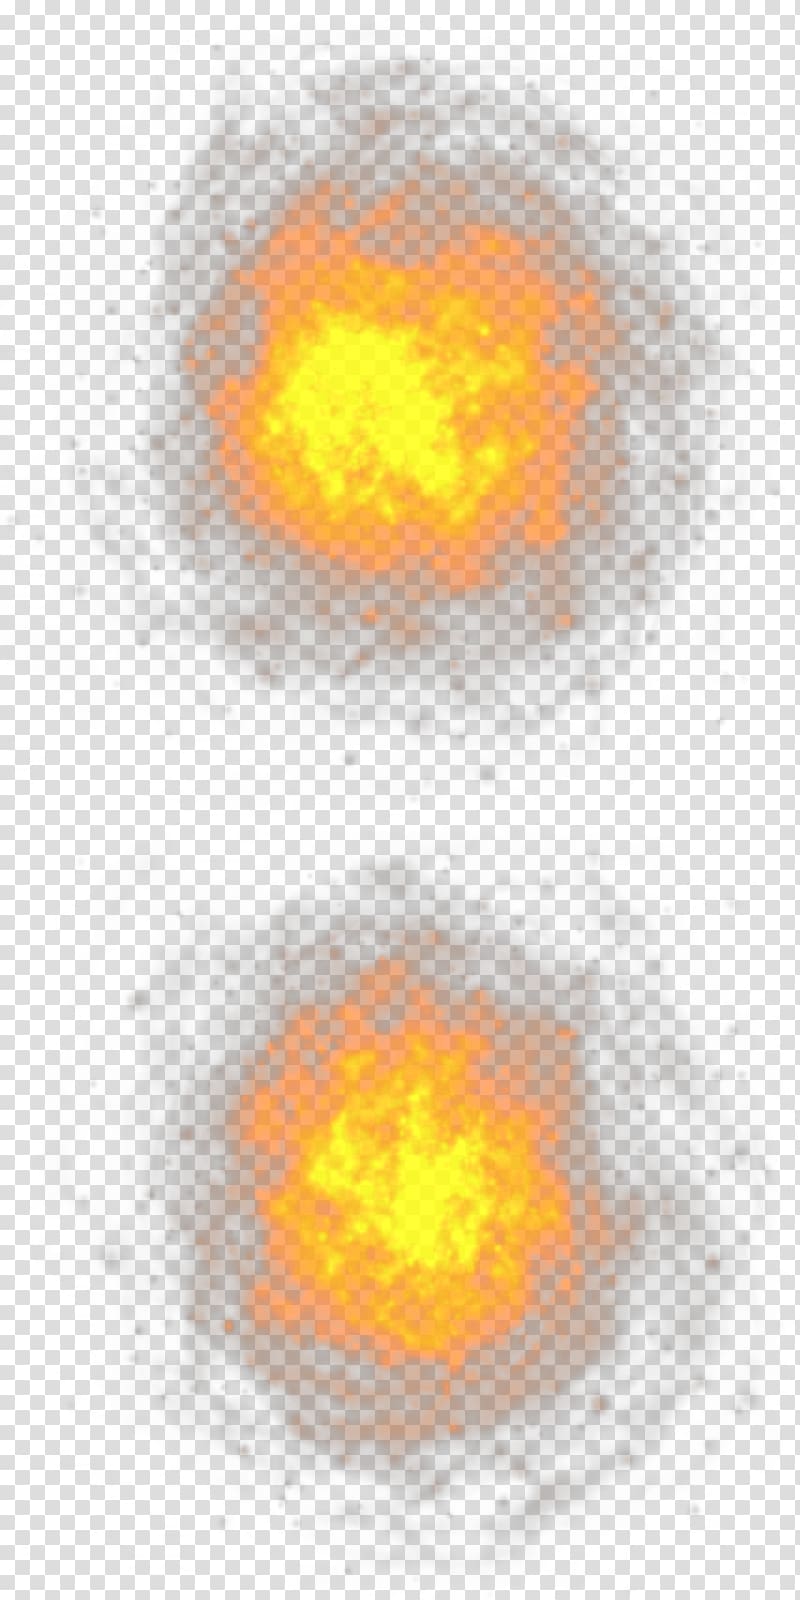 Flame Project Fire, flame transparent background PNG clipart